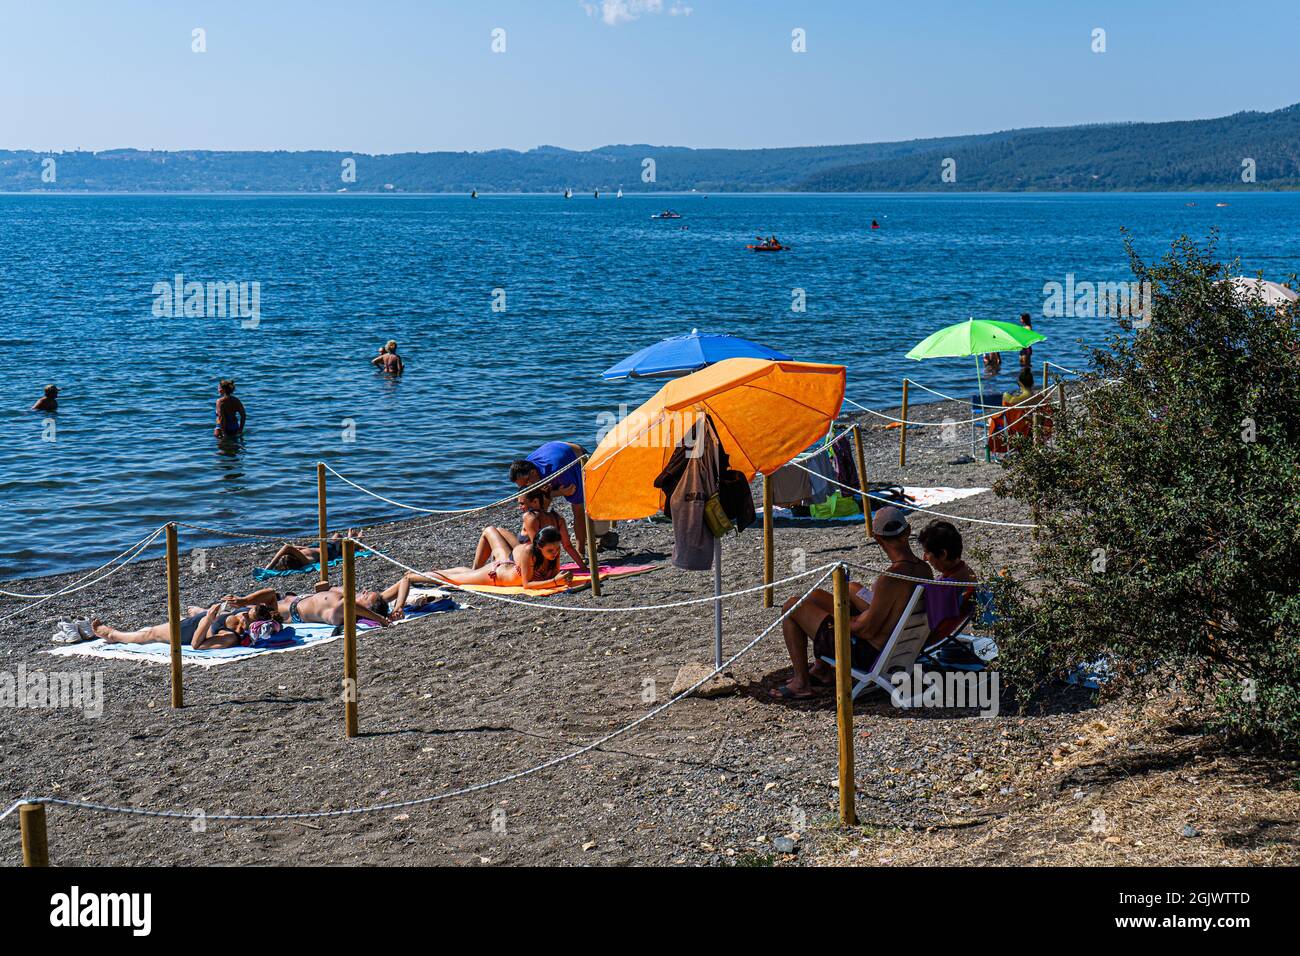 TREVIGNANO ROMANO ITALY, UK. 12 September, 2021.  The beach is crowded with sunseekers on a hot day on lake Bracciano as families and people come up for the weekend from Rome to the tourist resort of Trevignano Romano to enjoy the sunshine as temperatures remain high in September. Credit: amer ghazzal/Alamy Live News Stock Photo